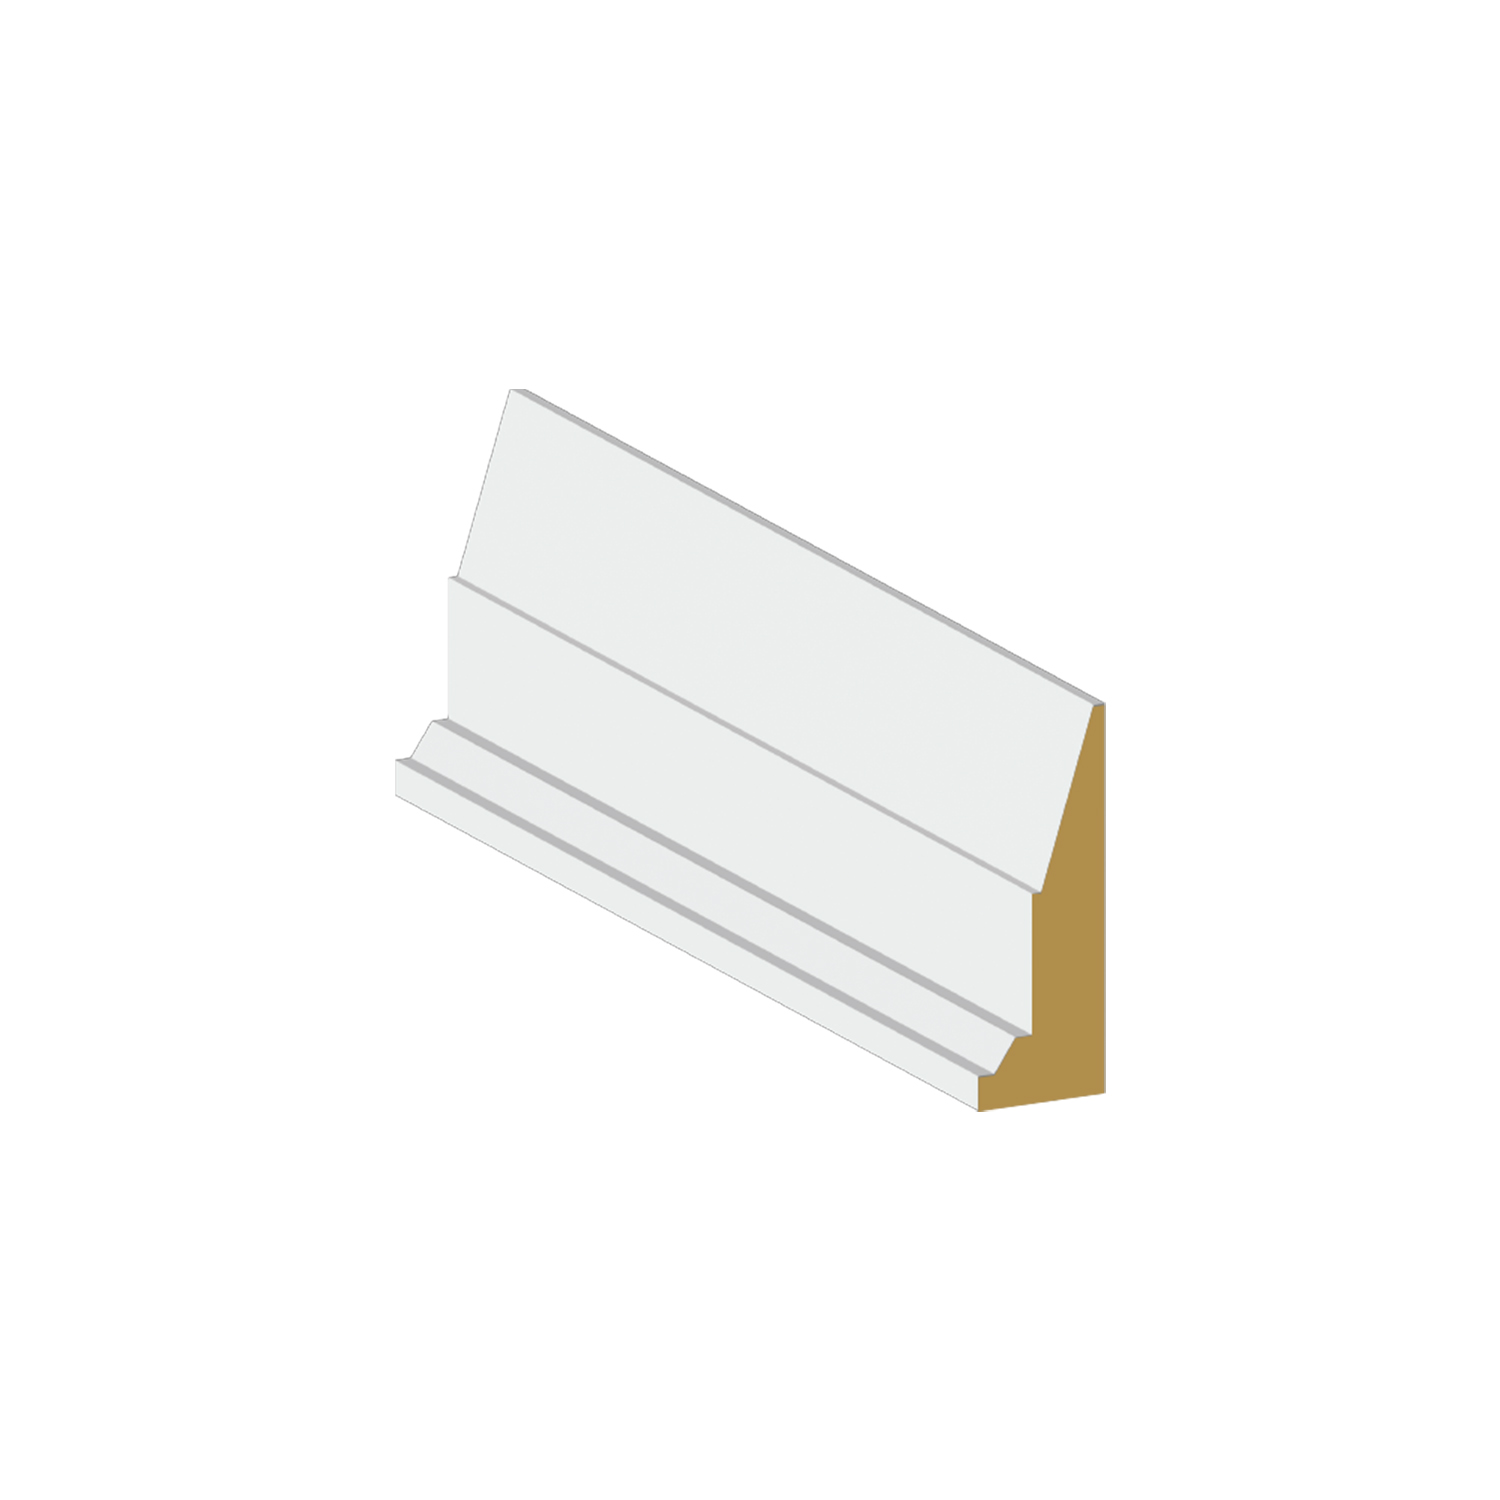 Casing MDF Step Bevel Back Band 3 1/2 x 1 1/8 x 8 1/2'' - $1.64/LF - SOLD PER PIECE - EACH PIECE IS 8 1/2' - $14.00 EACH